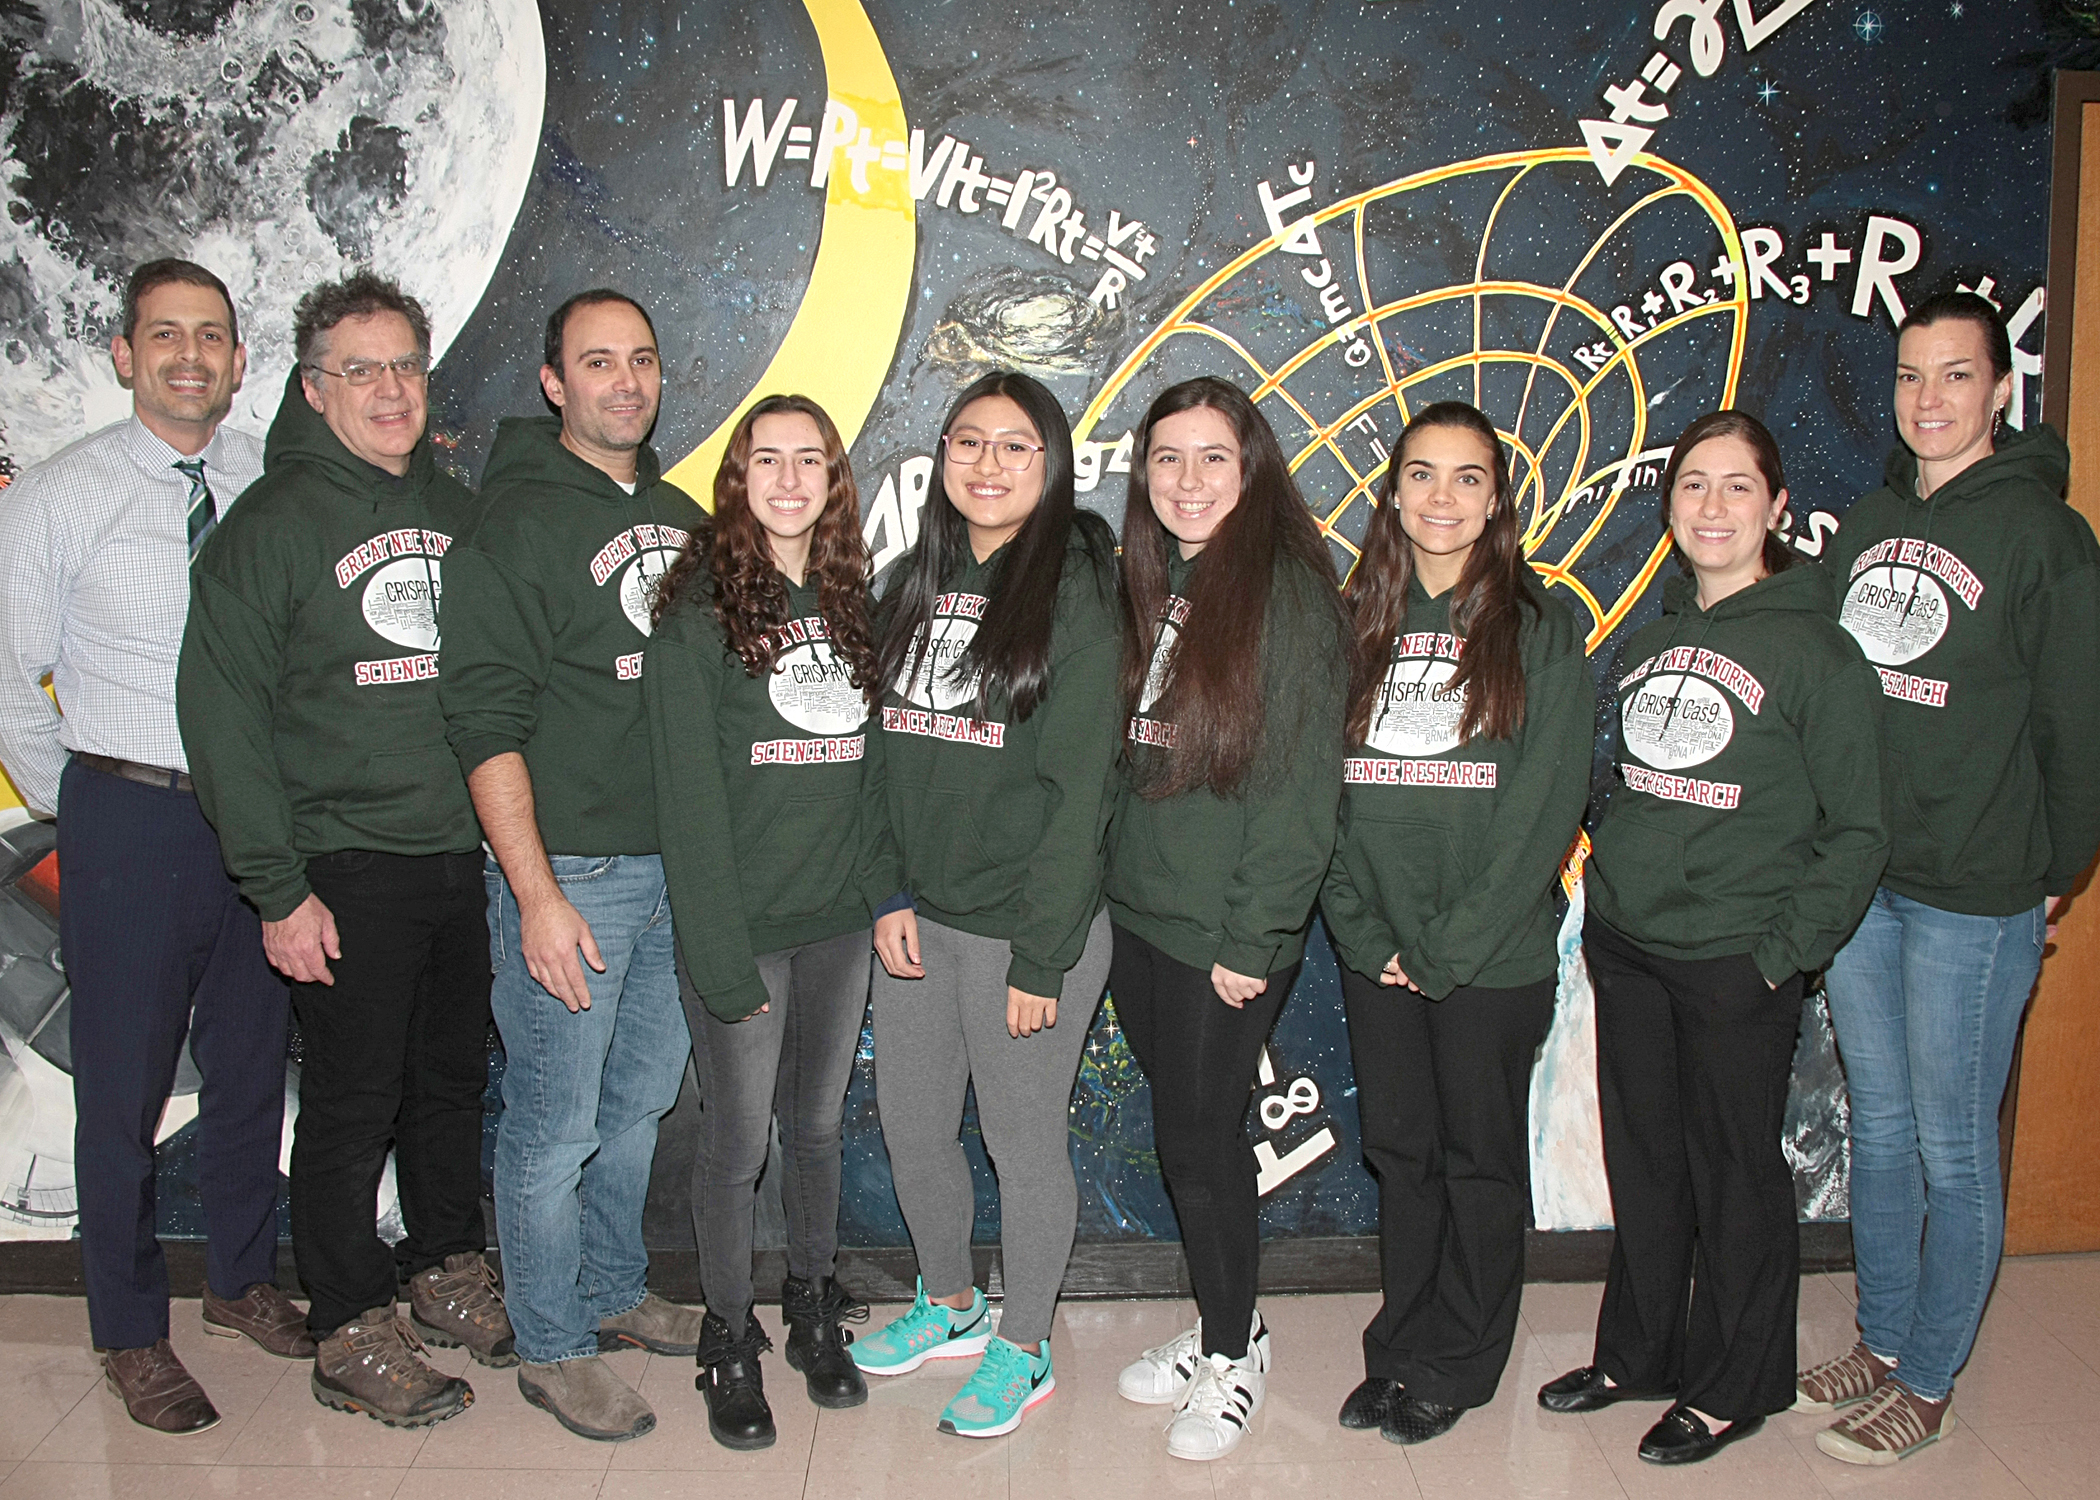 North High Regeneron Scholars Natasha Dilamani, Megan Xu and Amy Shteyman are joined by Principal Daniel Holtzman and science research teachers Alan Schorn, Christopher Bambino, Christina Keys and Maya Lerner, and Science Department Chair Jessica Schust. (Photo courtesy of the Great Neck Public Schools)